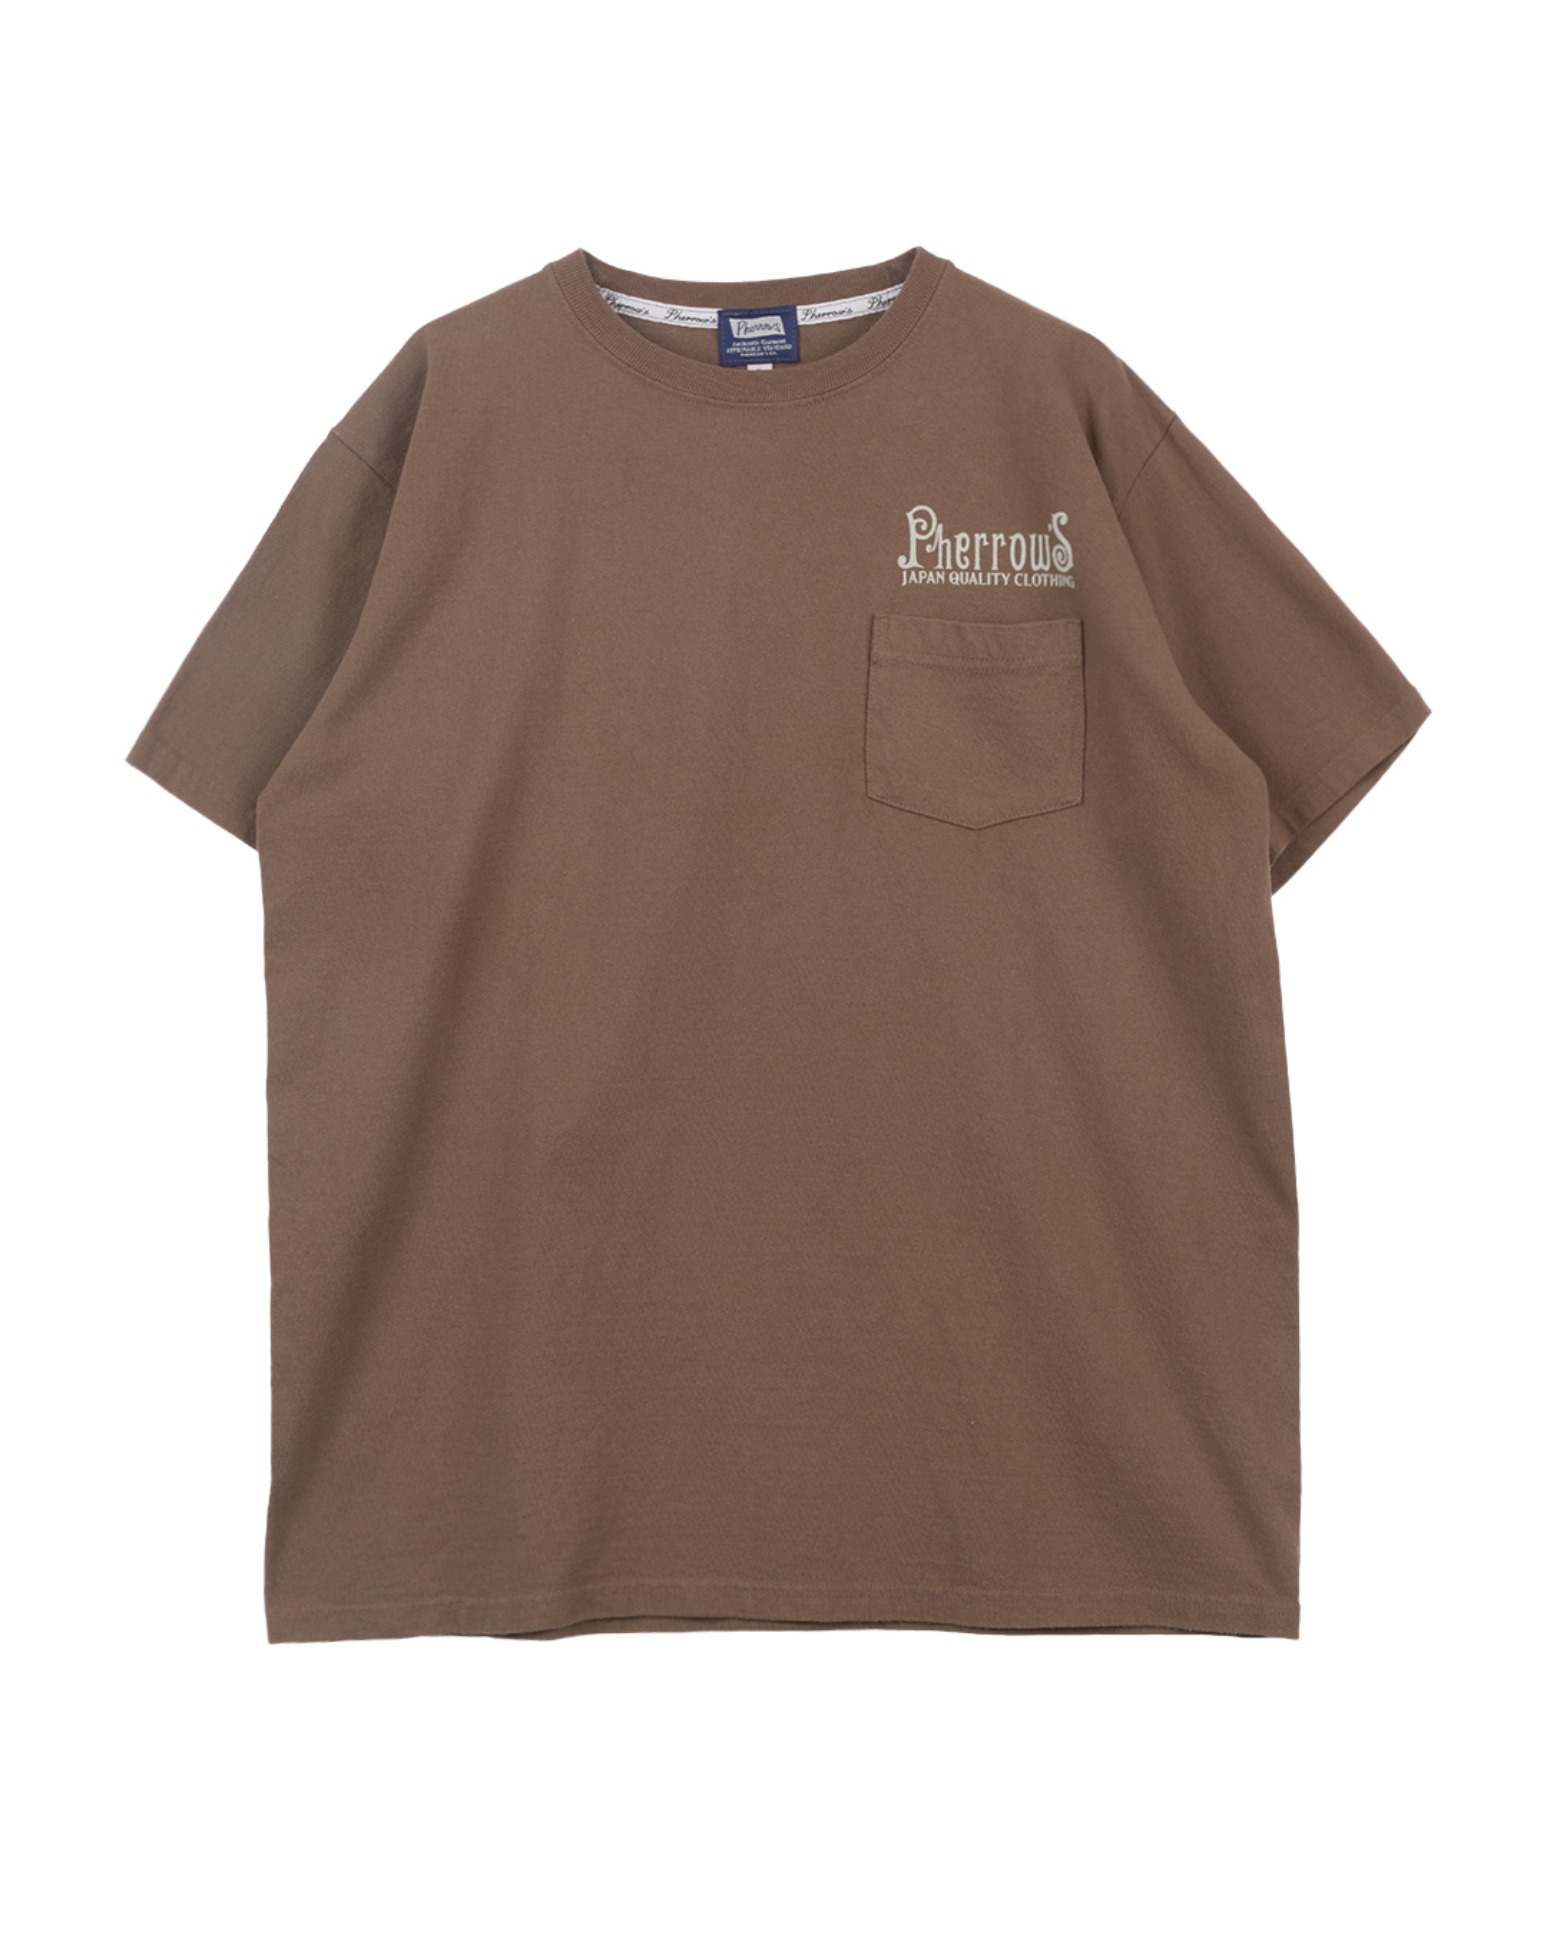 24S-PPT2 PPT-Series Print T-shirt (Cocoa)